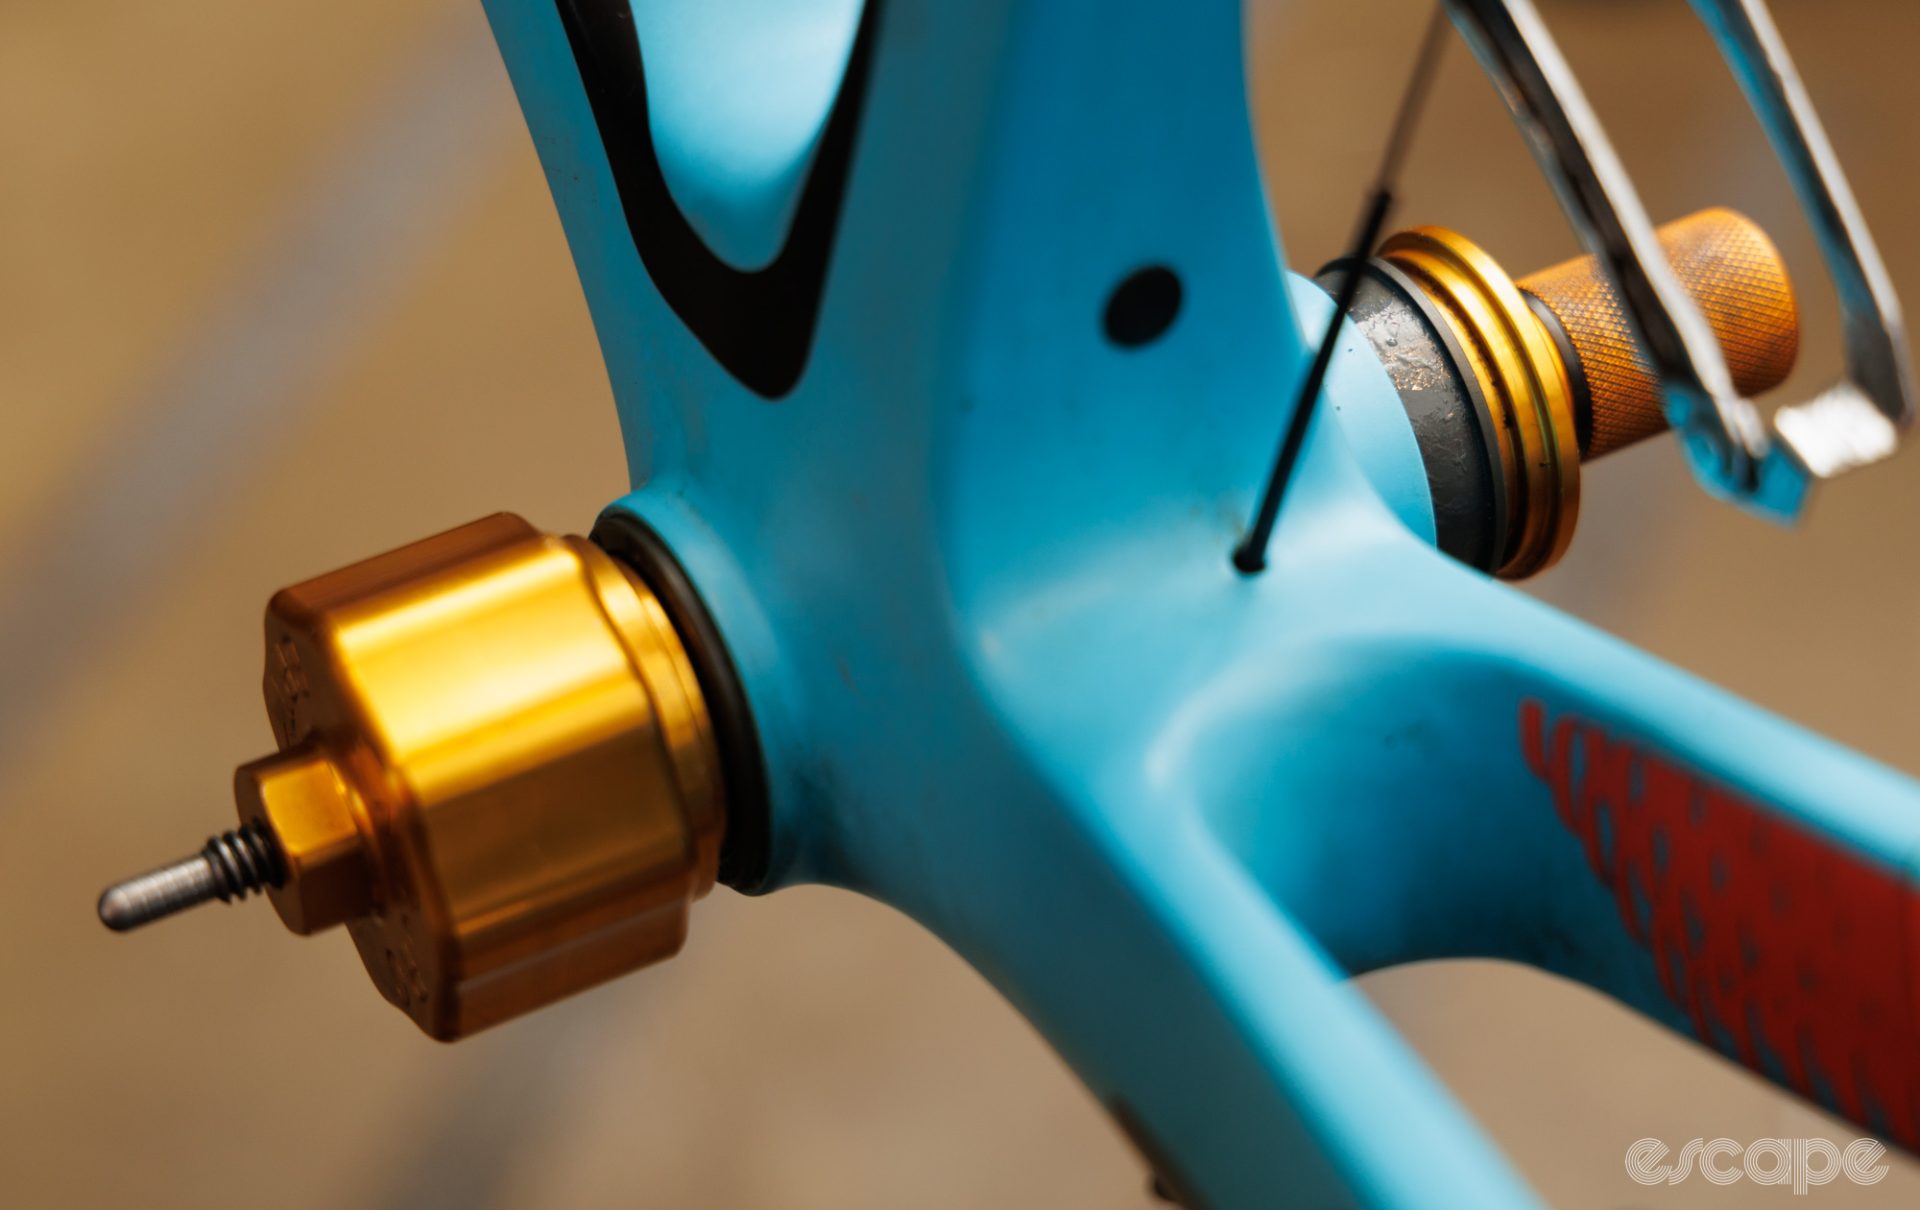 A Shimano press-fit bottom bracket is installed into a Giant bicycle. A gold-coloured Enduro tool is used. 